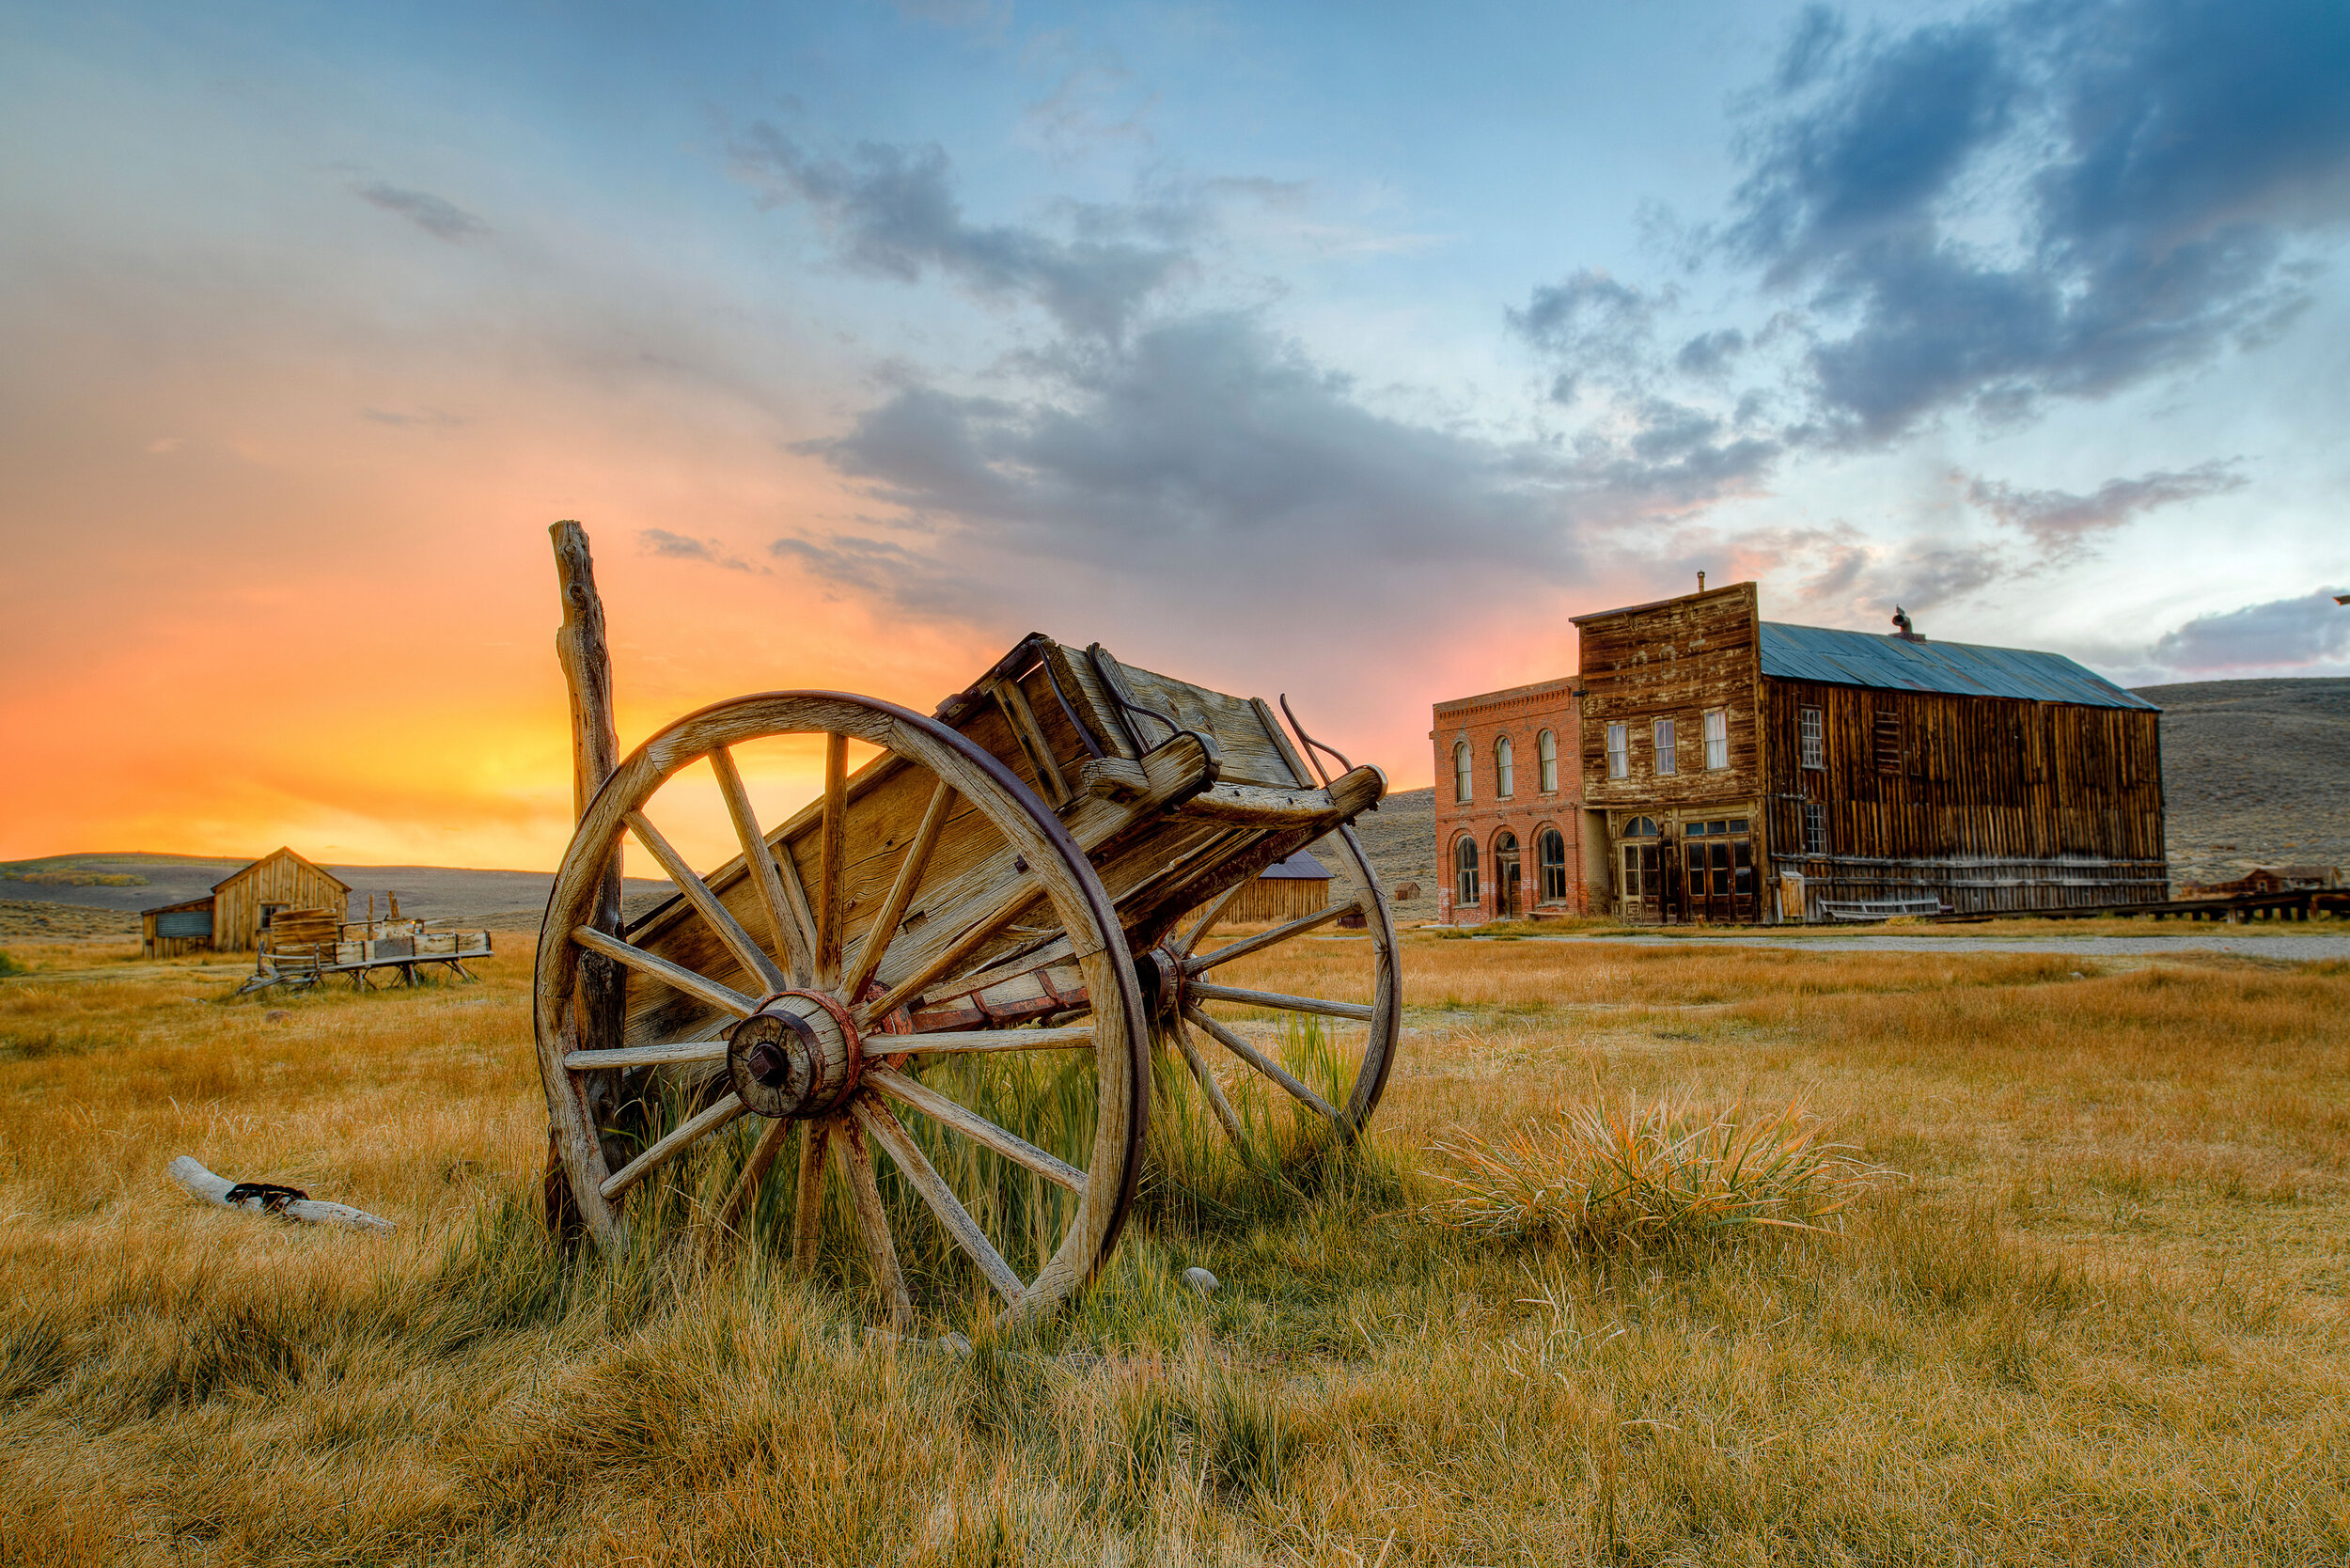  Protecting Bodie’s Future   BY PRESERVING ITS PAST  